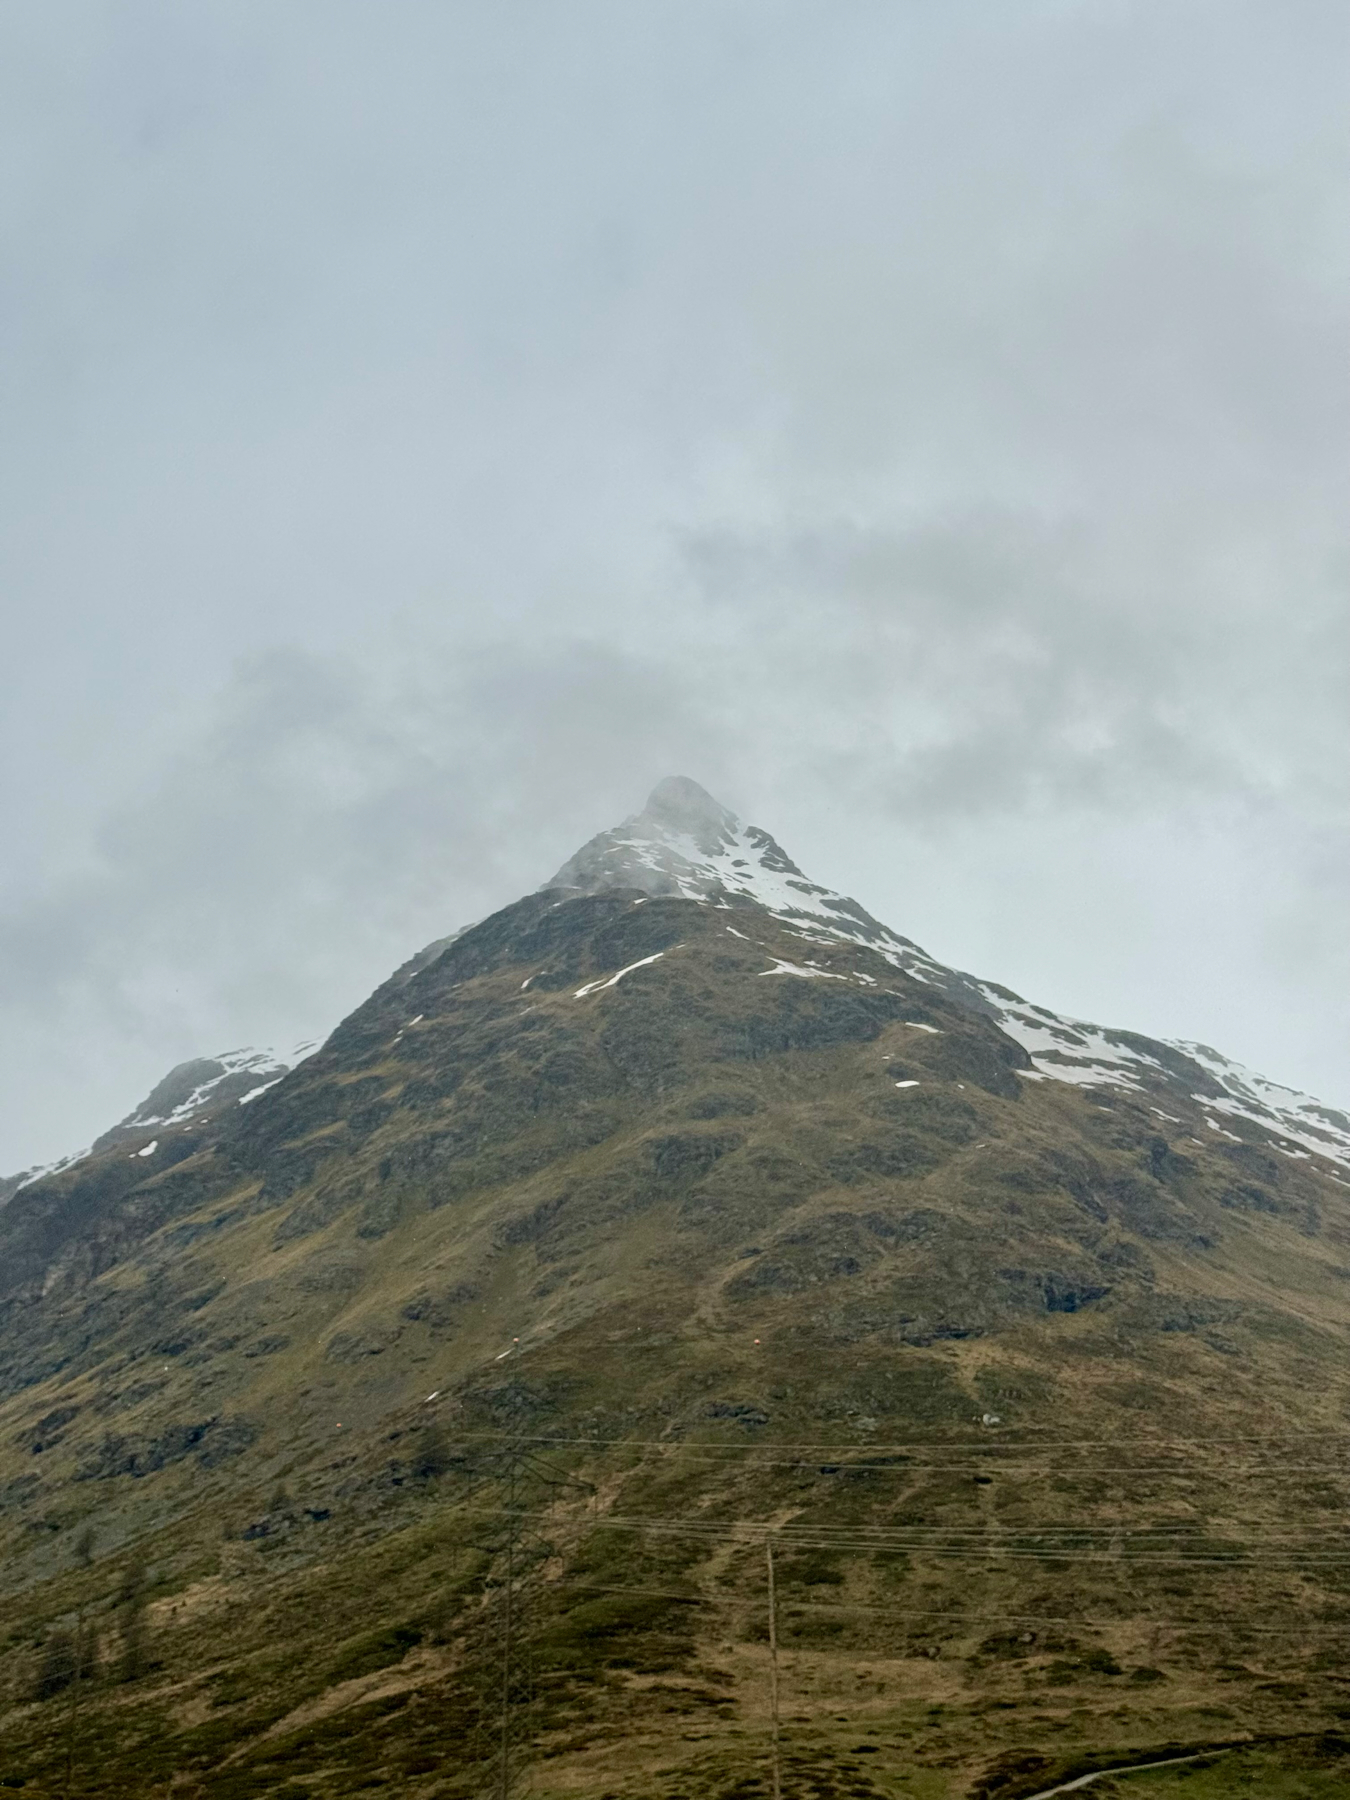 A mountain peak with some snow, against a cloudy sky, with the lower slopes covered in grass and some power lines visible in the foreground.